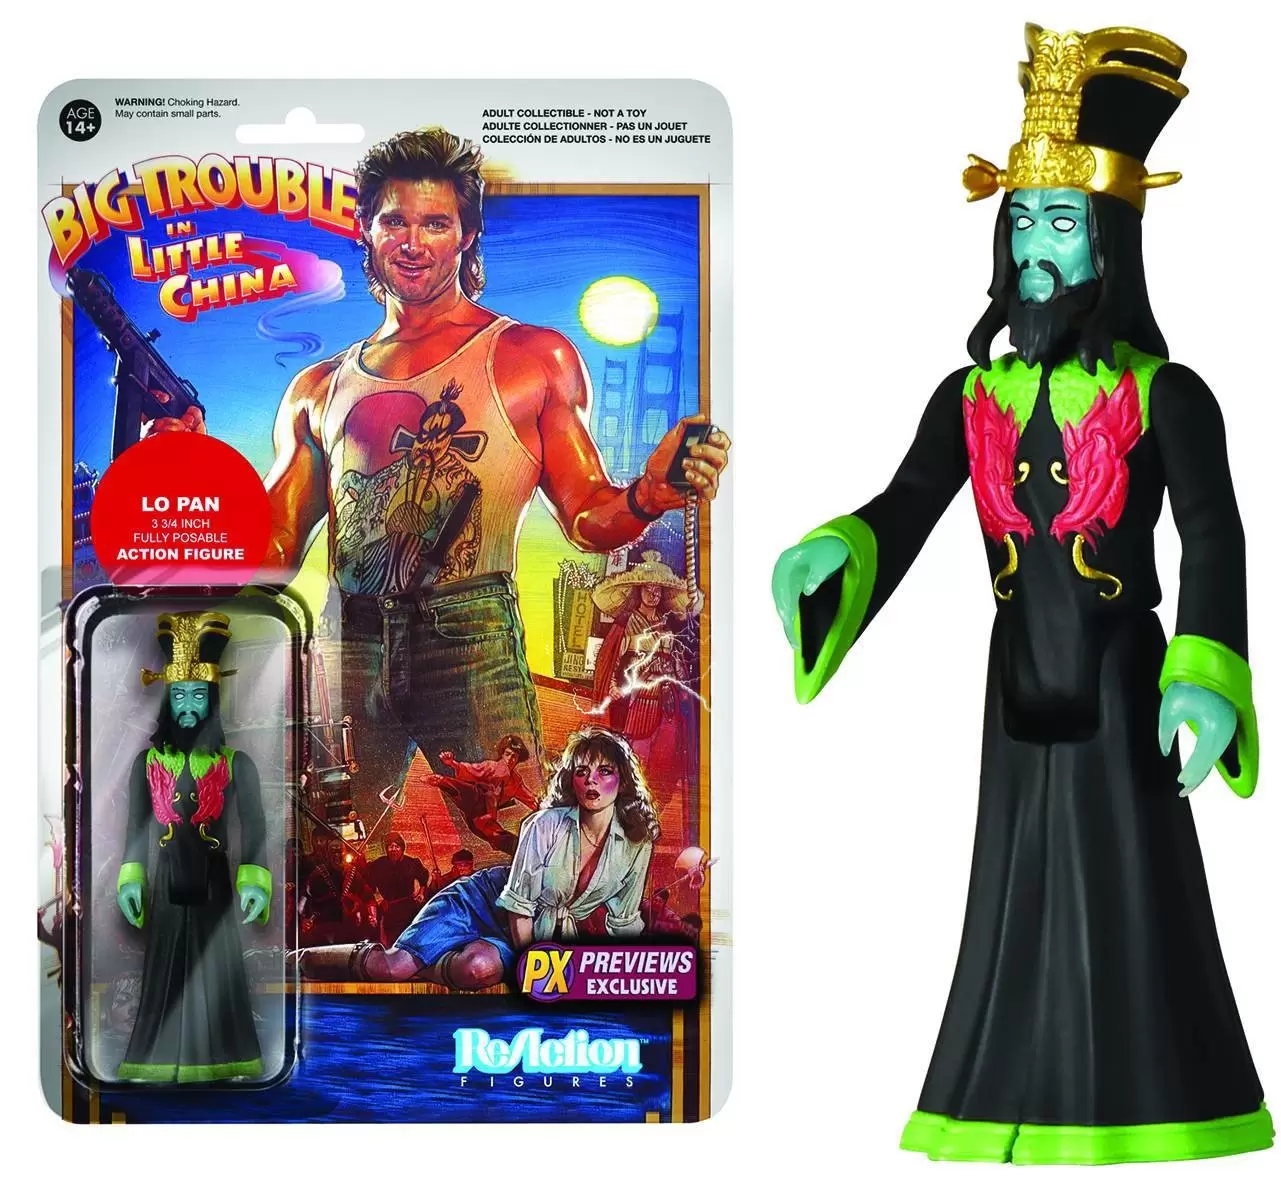 ReAction Figures - Big Trouble in Little China - Lo Pan Ghost